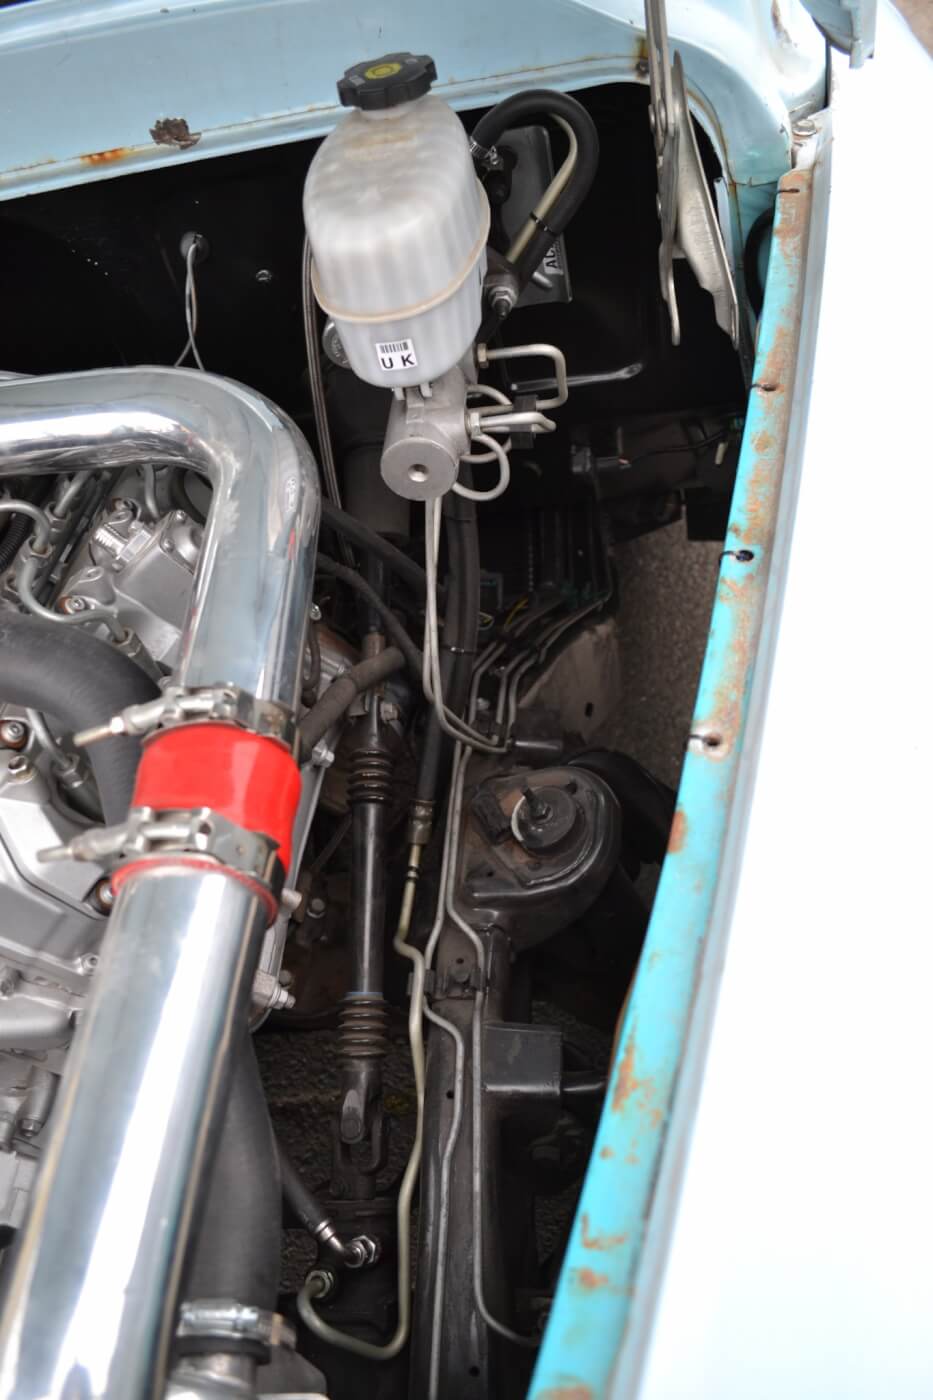 The hydroboost braking system was adapted to the '58 Chevy's body when Bill did the swap so that he could actually stop. A driver's side exhaust manifold from Pacific Performance Engineering was also fitted at the same time to improve airflow to the turbocharger.